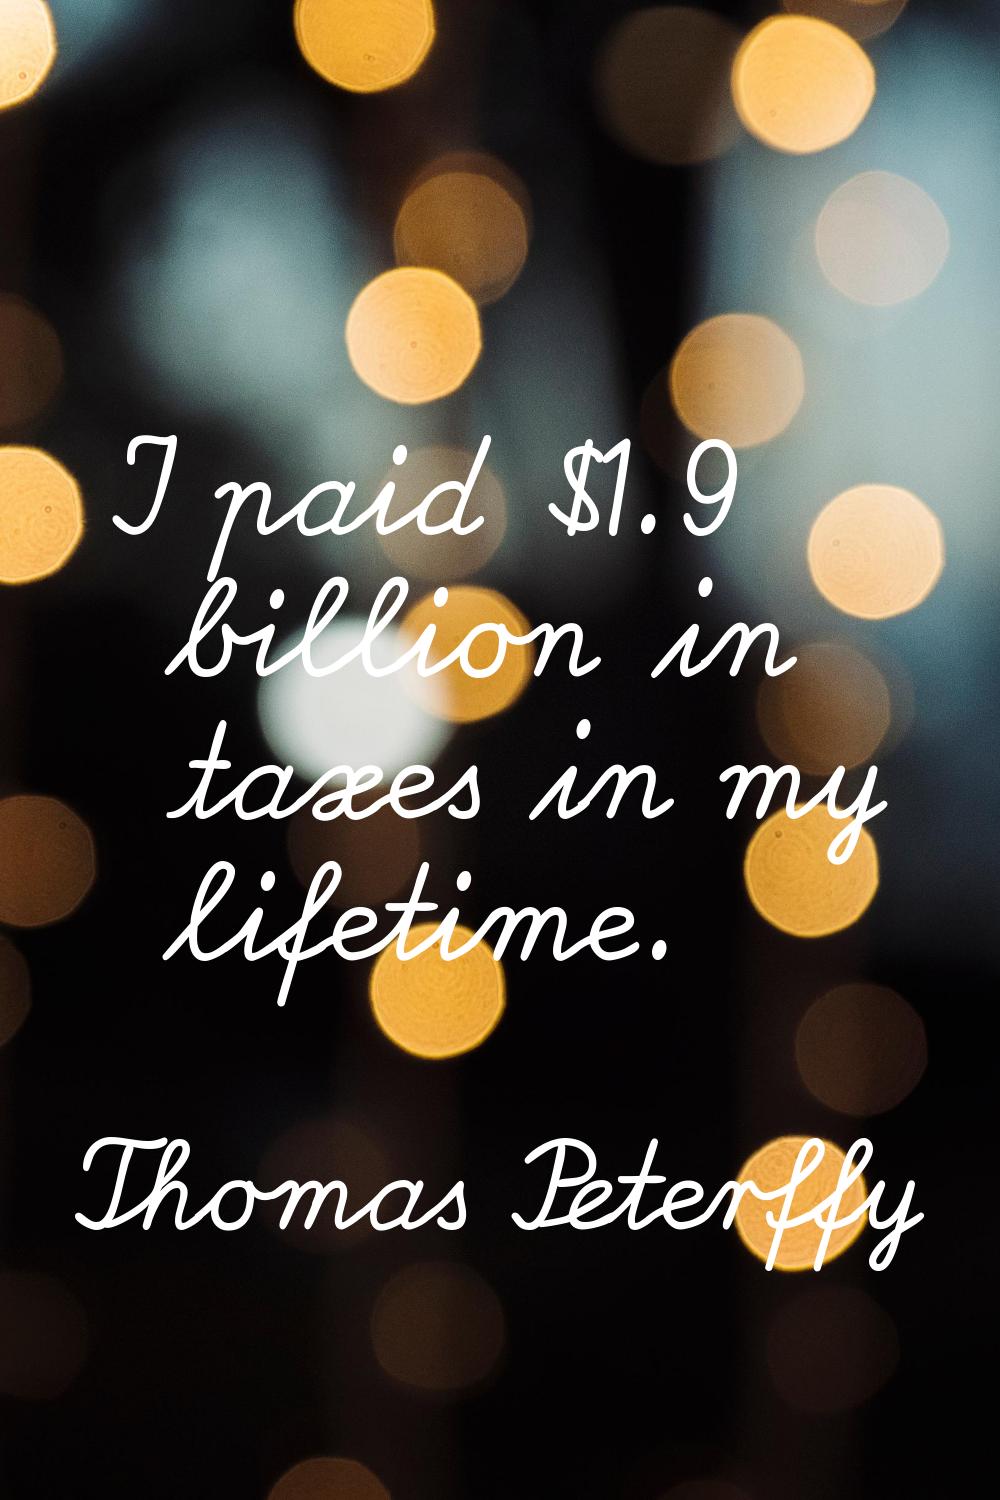 I paid $1.9 billion in taxes in my lifetime.